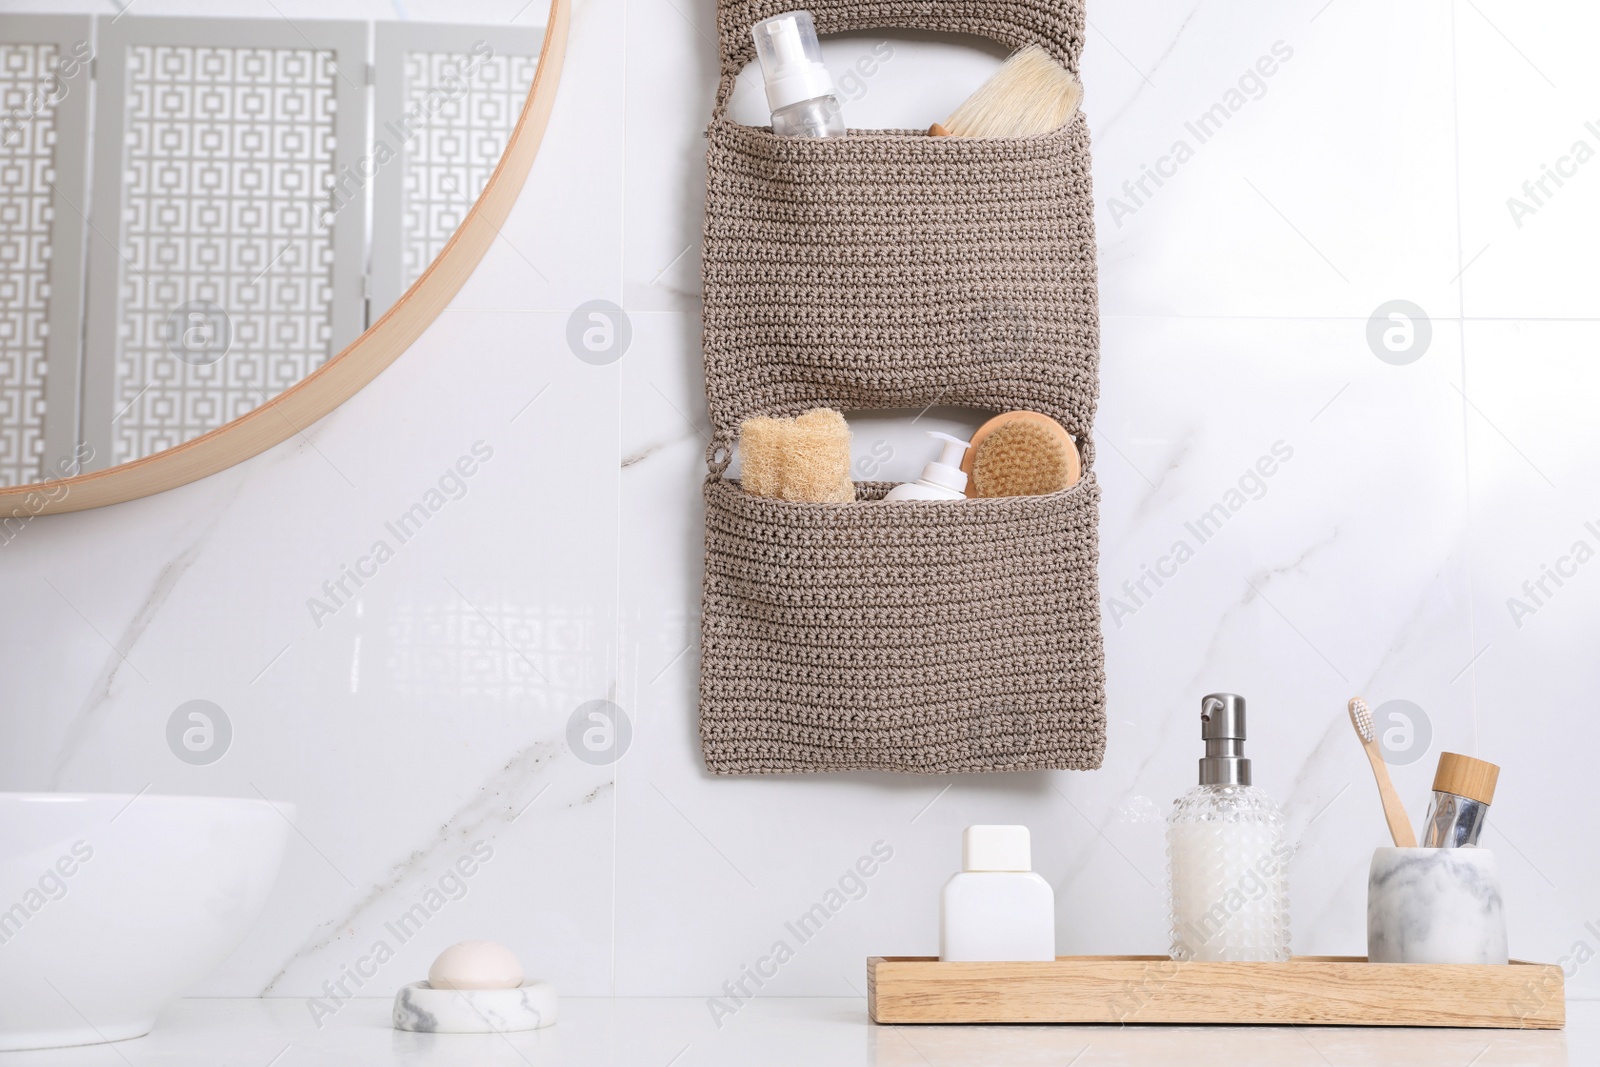 Photo of Countertop and storage with essentials in bathroom. Stylish accessory